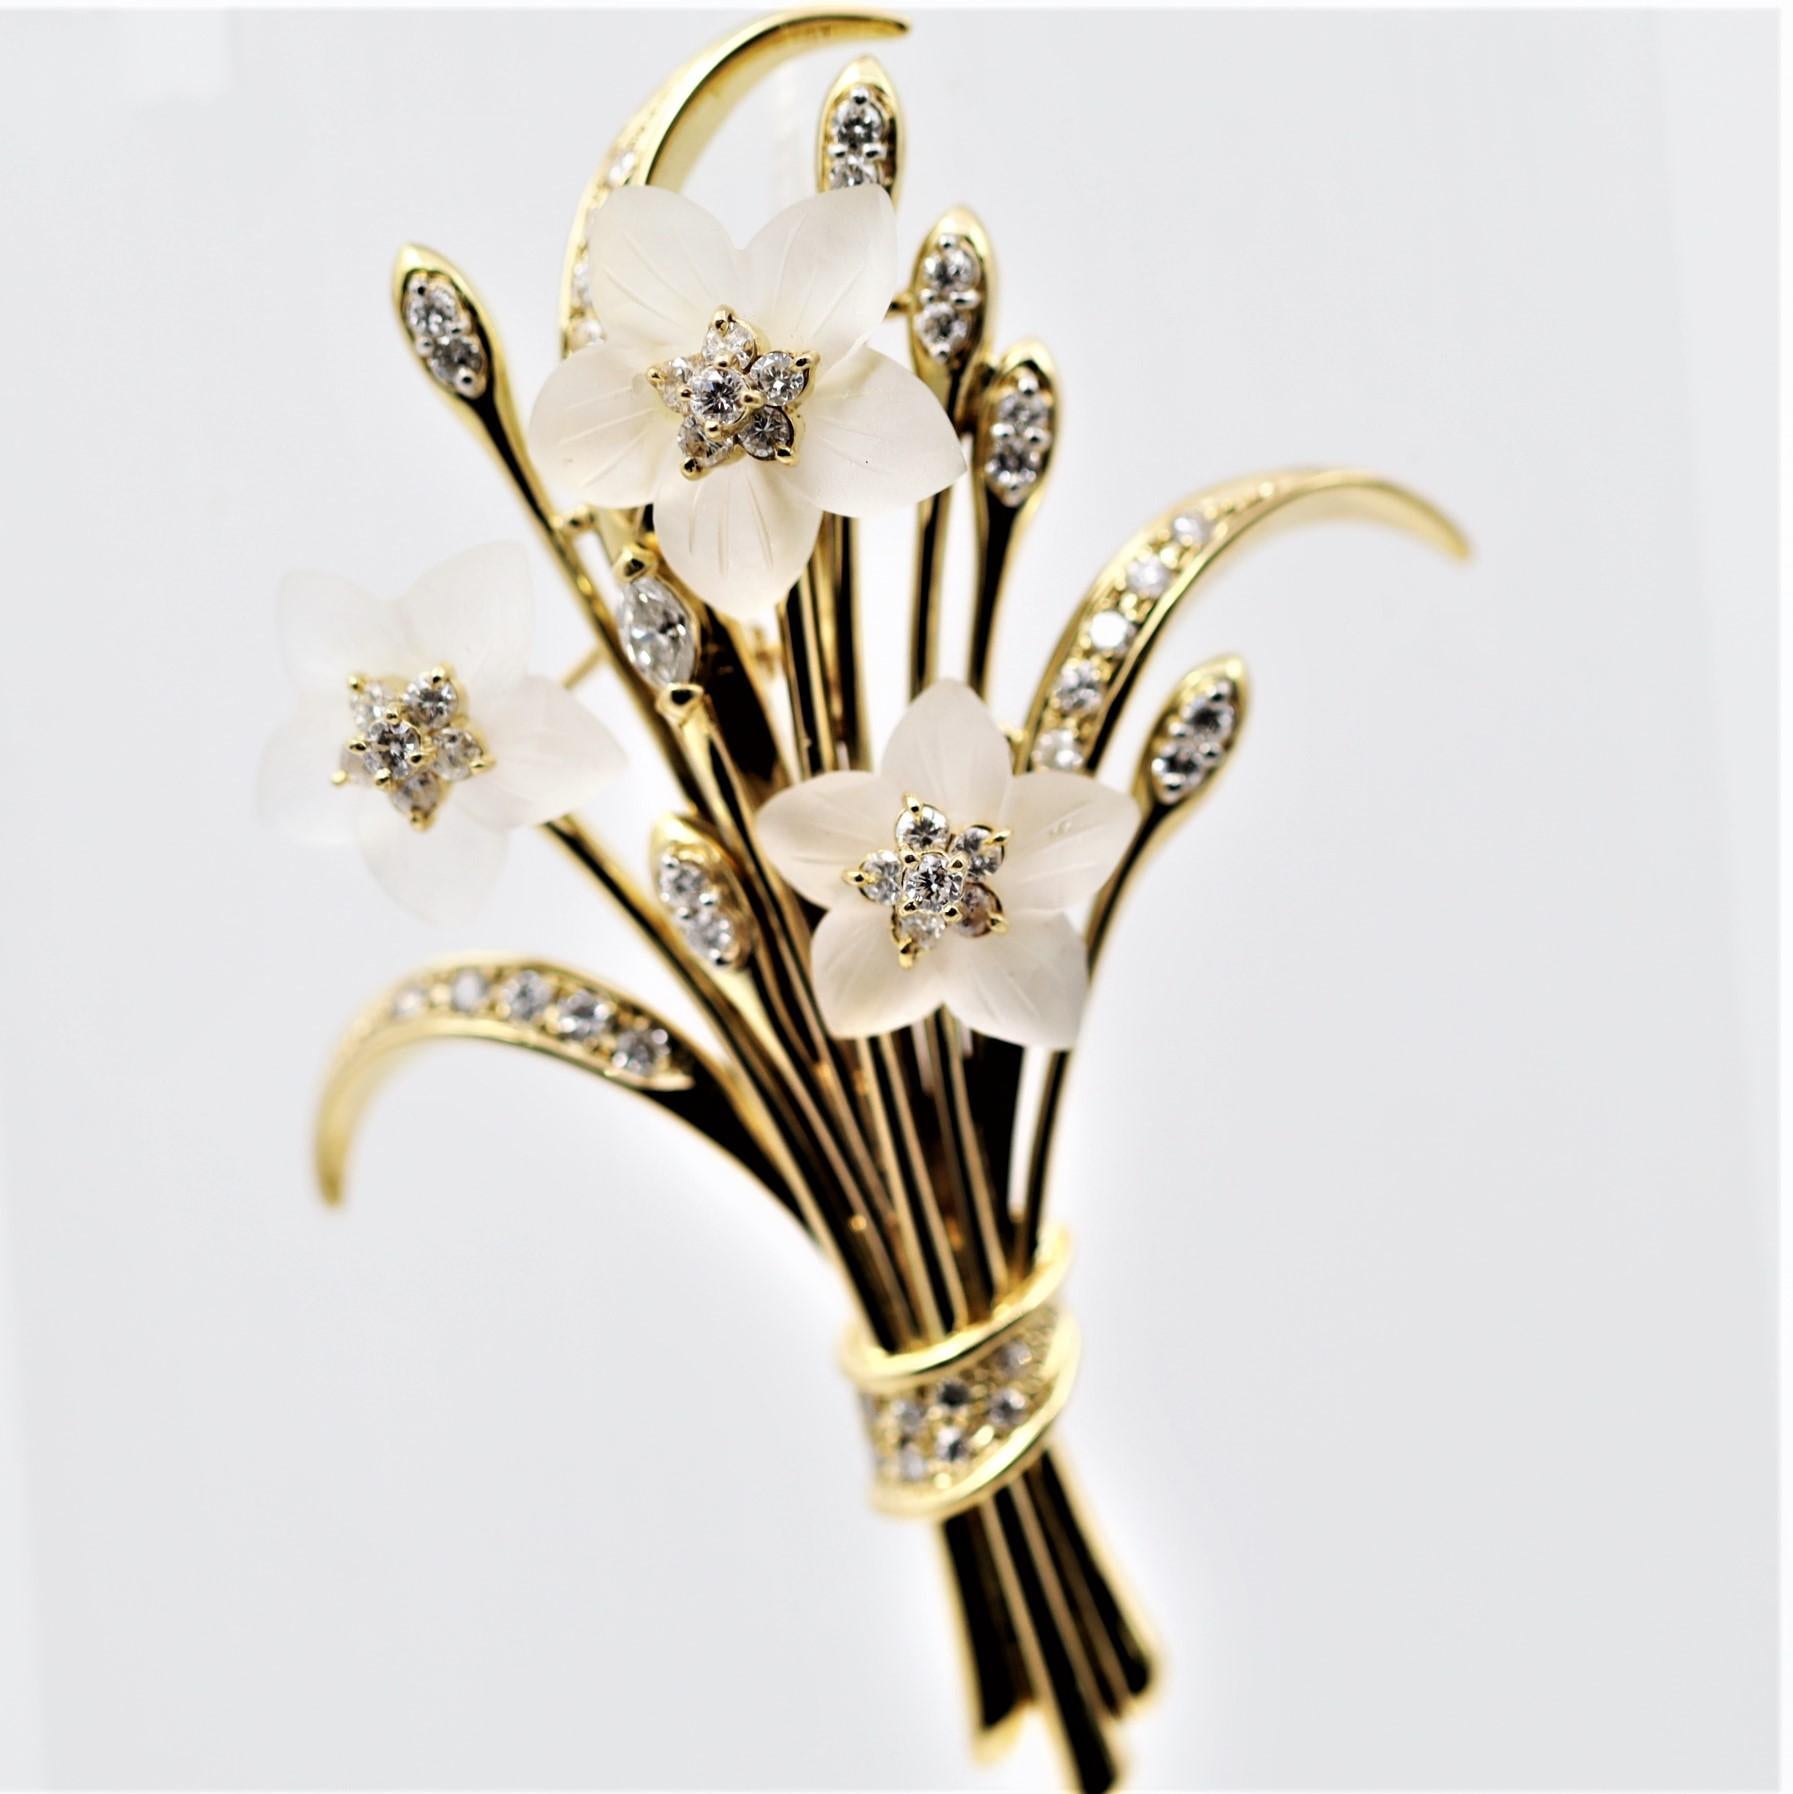 A lovely, detailed brooch featuring 1.24 carats of diamonds along with three flowers made of hand-carved quartz creating a bouquet of flowers. The attention to detail is very high as the realism of this piece sets itself apart. Made in 18k yellow